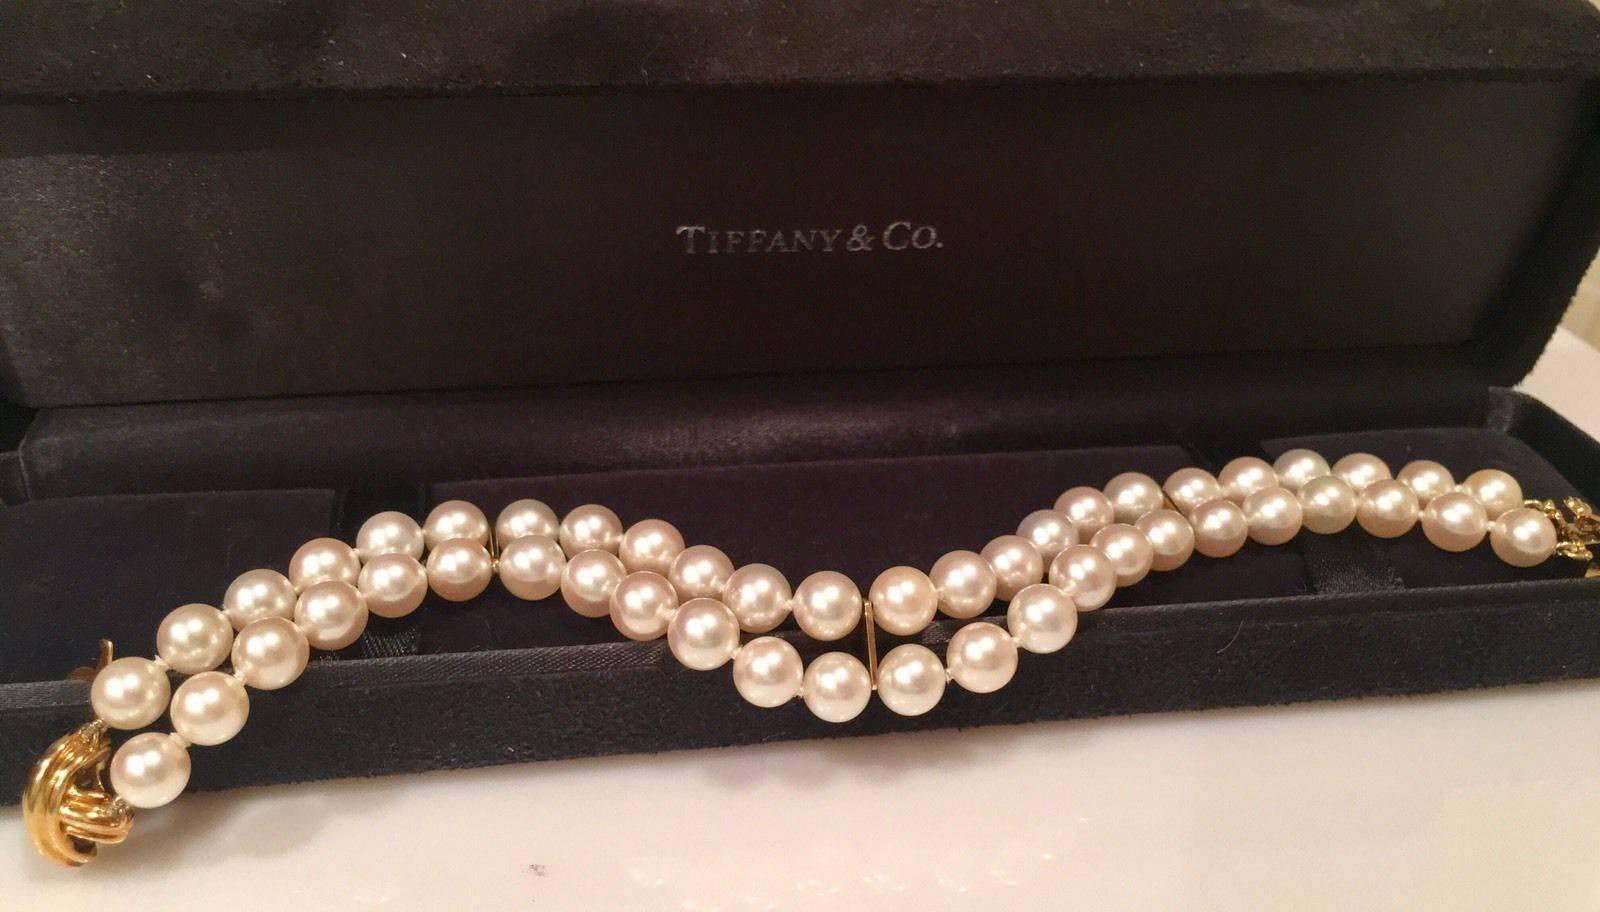 Gorgeous large "Signature X"  Tiffany & Co. 18k Yellow Gold Double Strand Cultured Pearl Bracelet.  The bracelet measures 8" from end of each clasp, with a wearable length when closed of 7.25".  The pearls measure